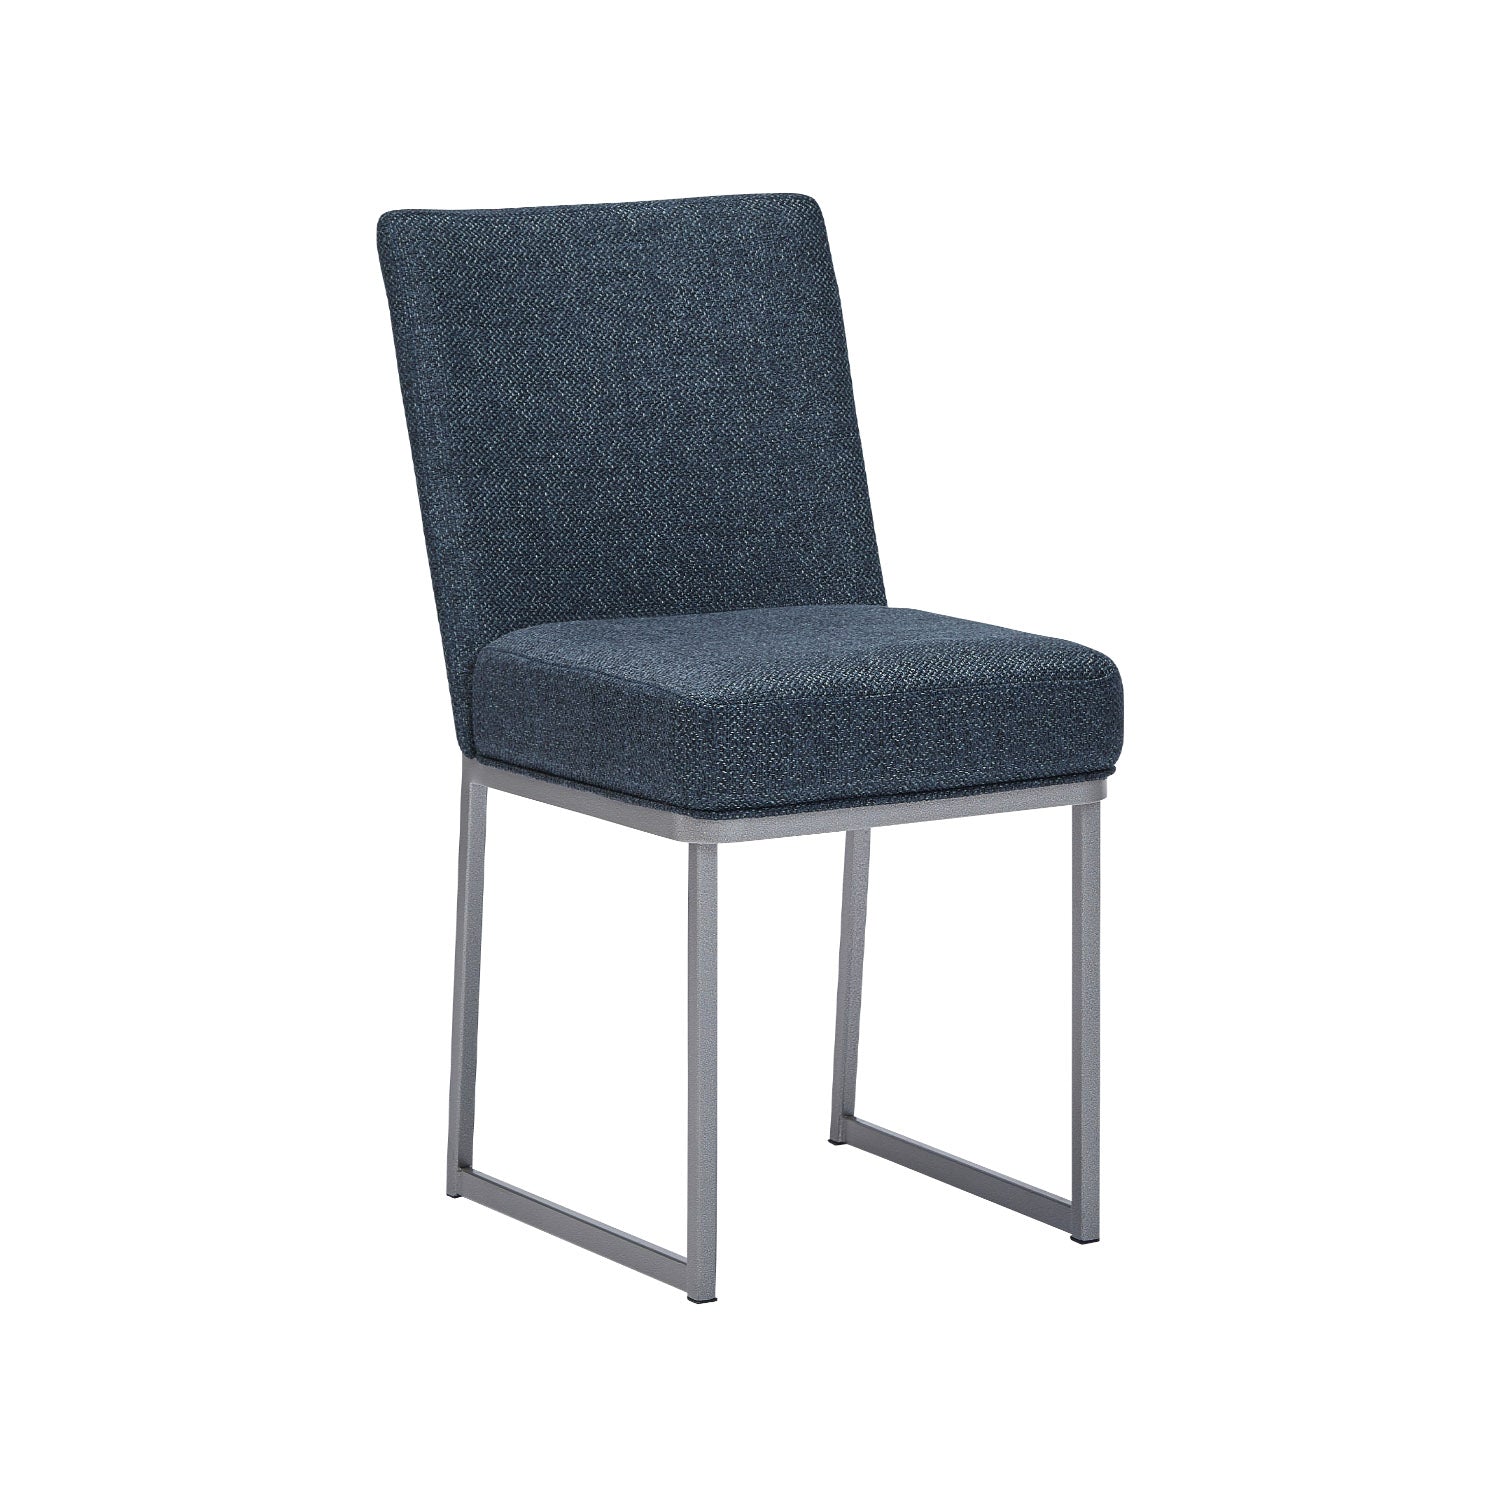 Wesley Allen Marbury Dining Chair in Charo Midnight Fabric and the Frame Finished in Silver Palladium.